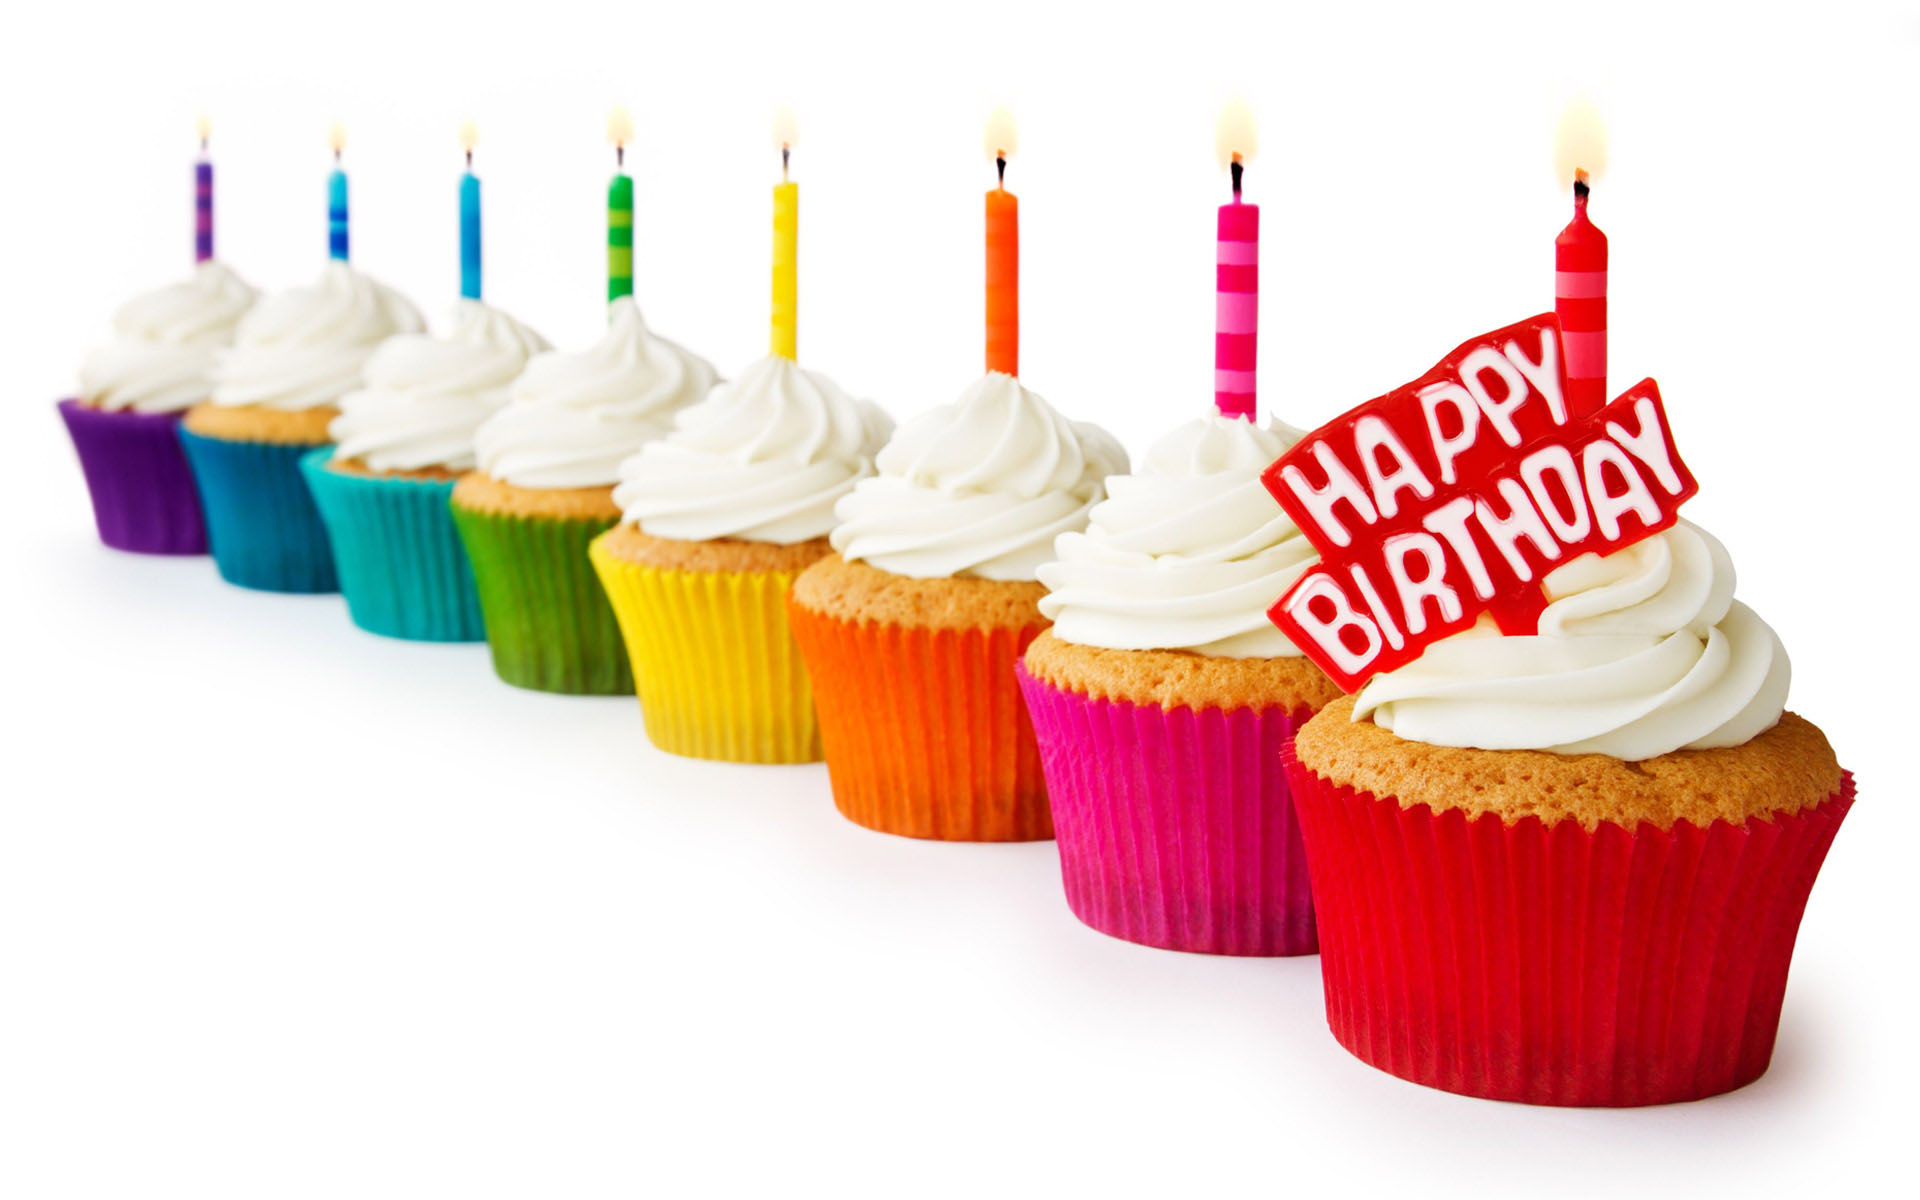 cute happy birthday images for facebook